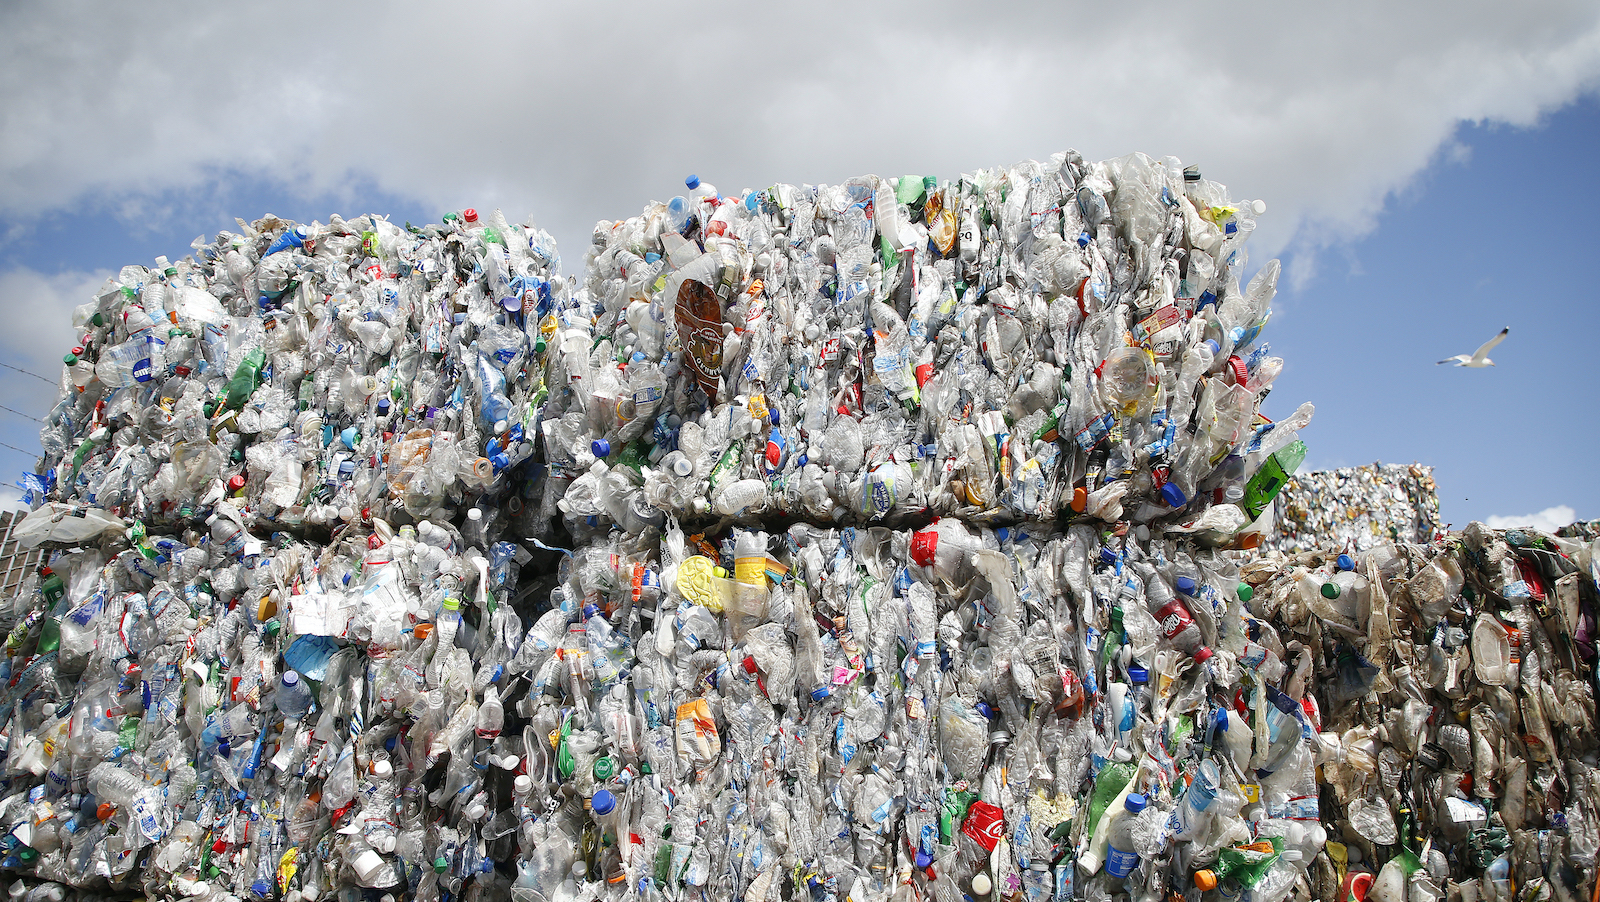 https://grist.org/wp-content/uploads/2020/05/san-jose-recycled-plastic-bales.jpg